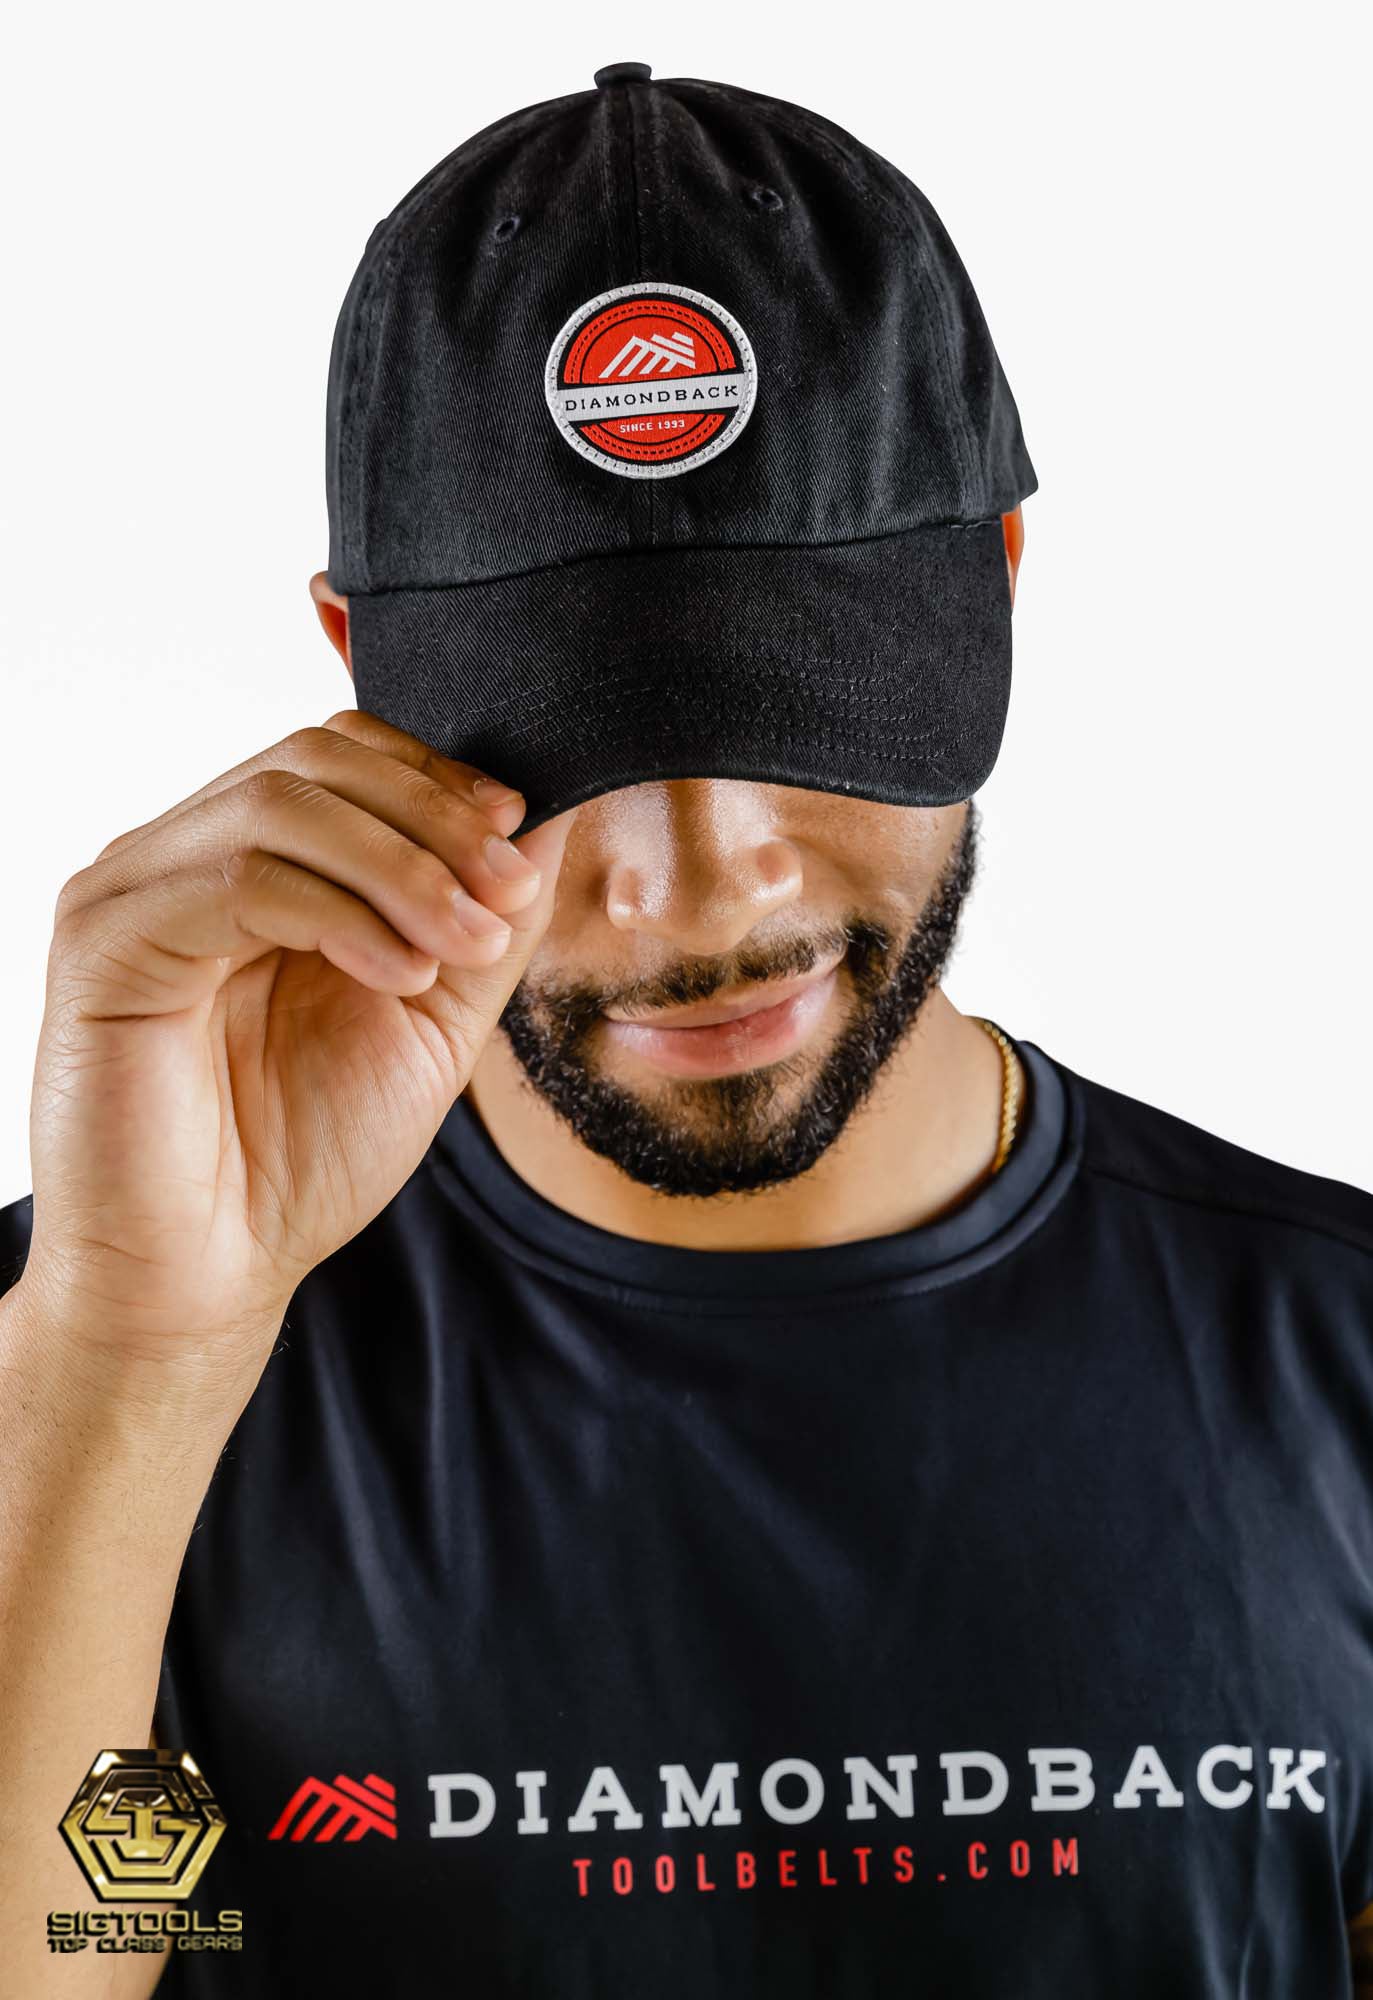 A person wearing a Diamondback red dad hat with the brand's logo on the front, smile as he's showcasing the hat's style and fit when worn